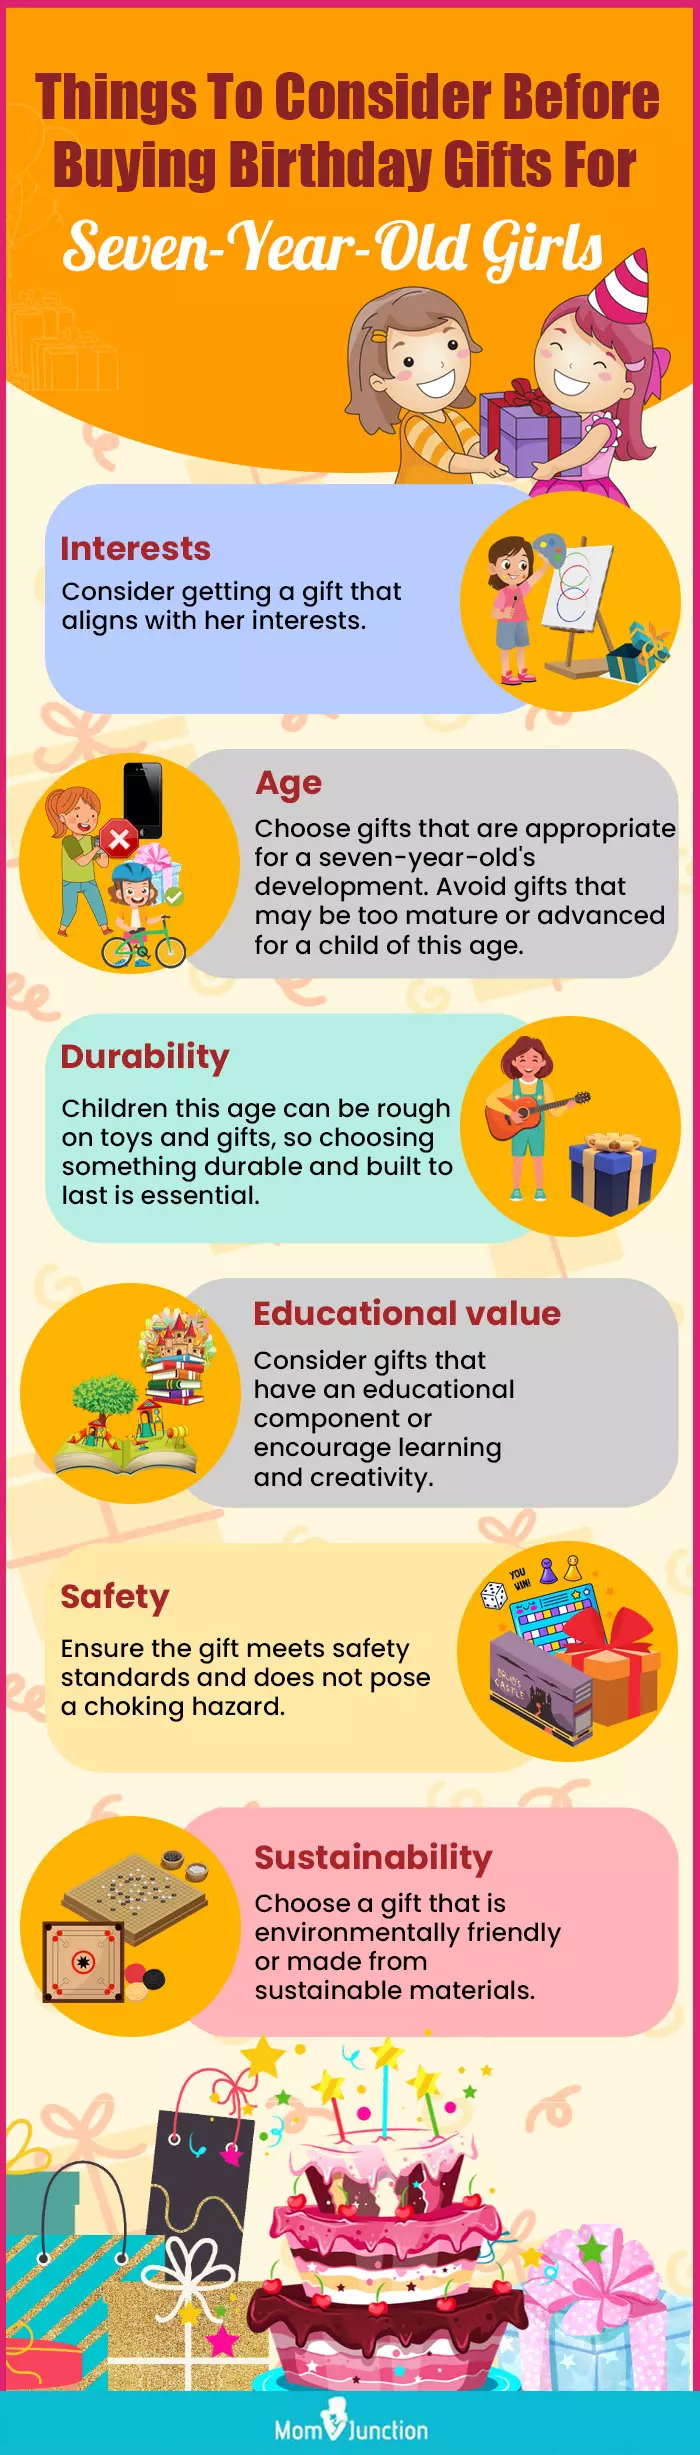 Things-To-Consider-Before-Buying-Birthday-Gifts-For-Seven-Year-Old-Girls (infographic)